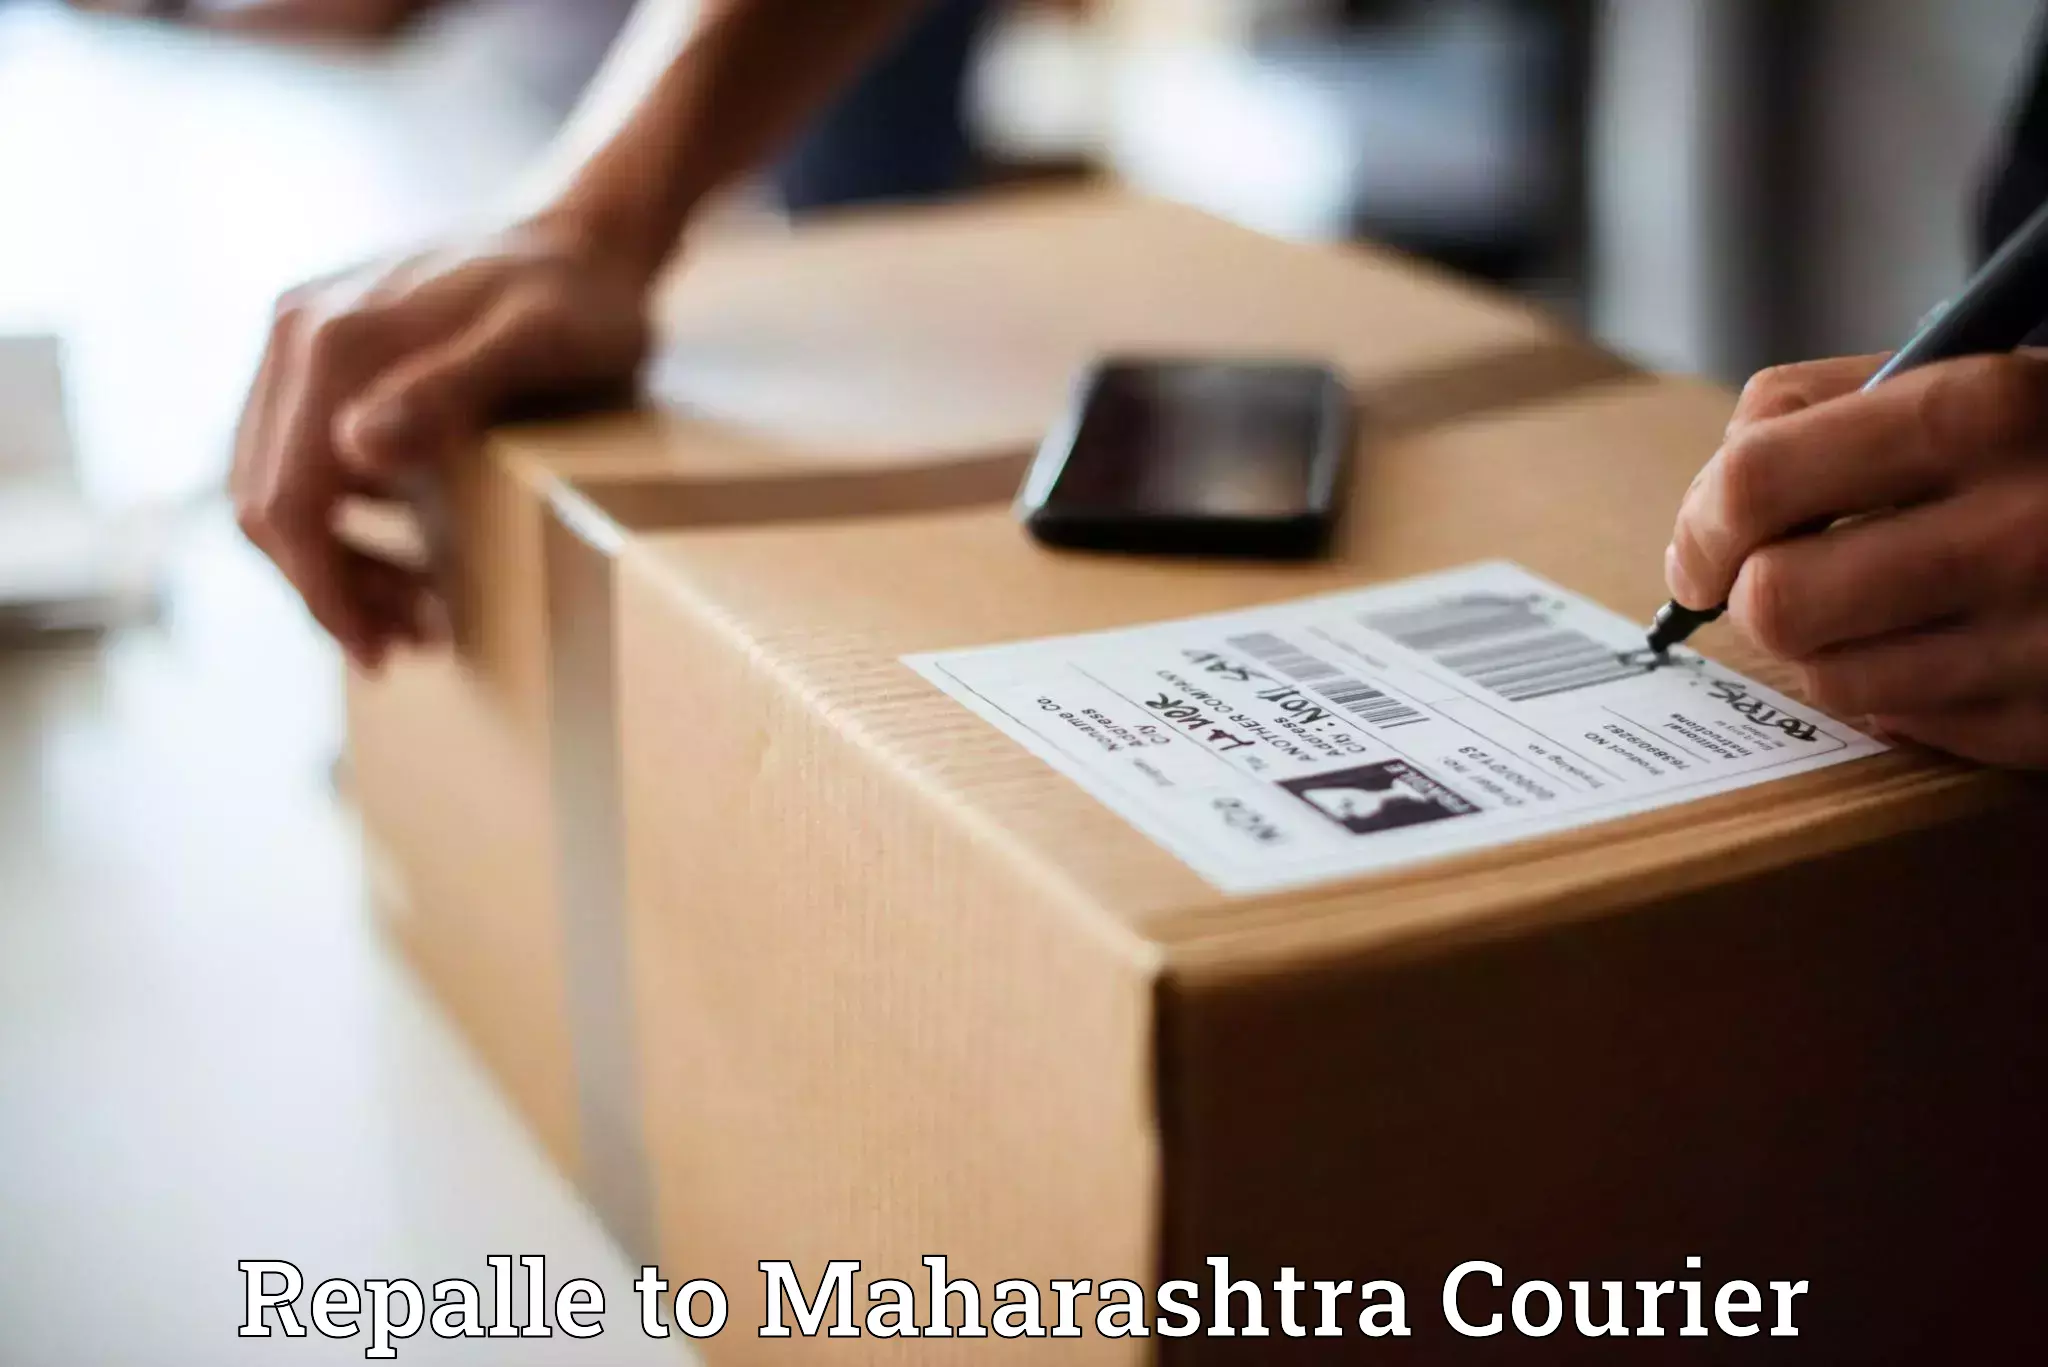 Professional courier handling in Repalle to Alephata